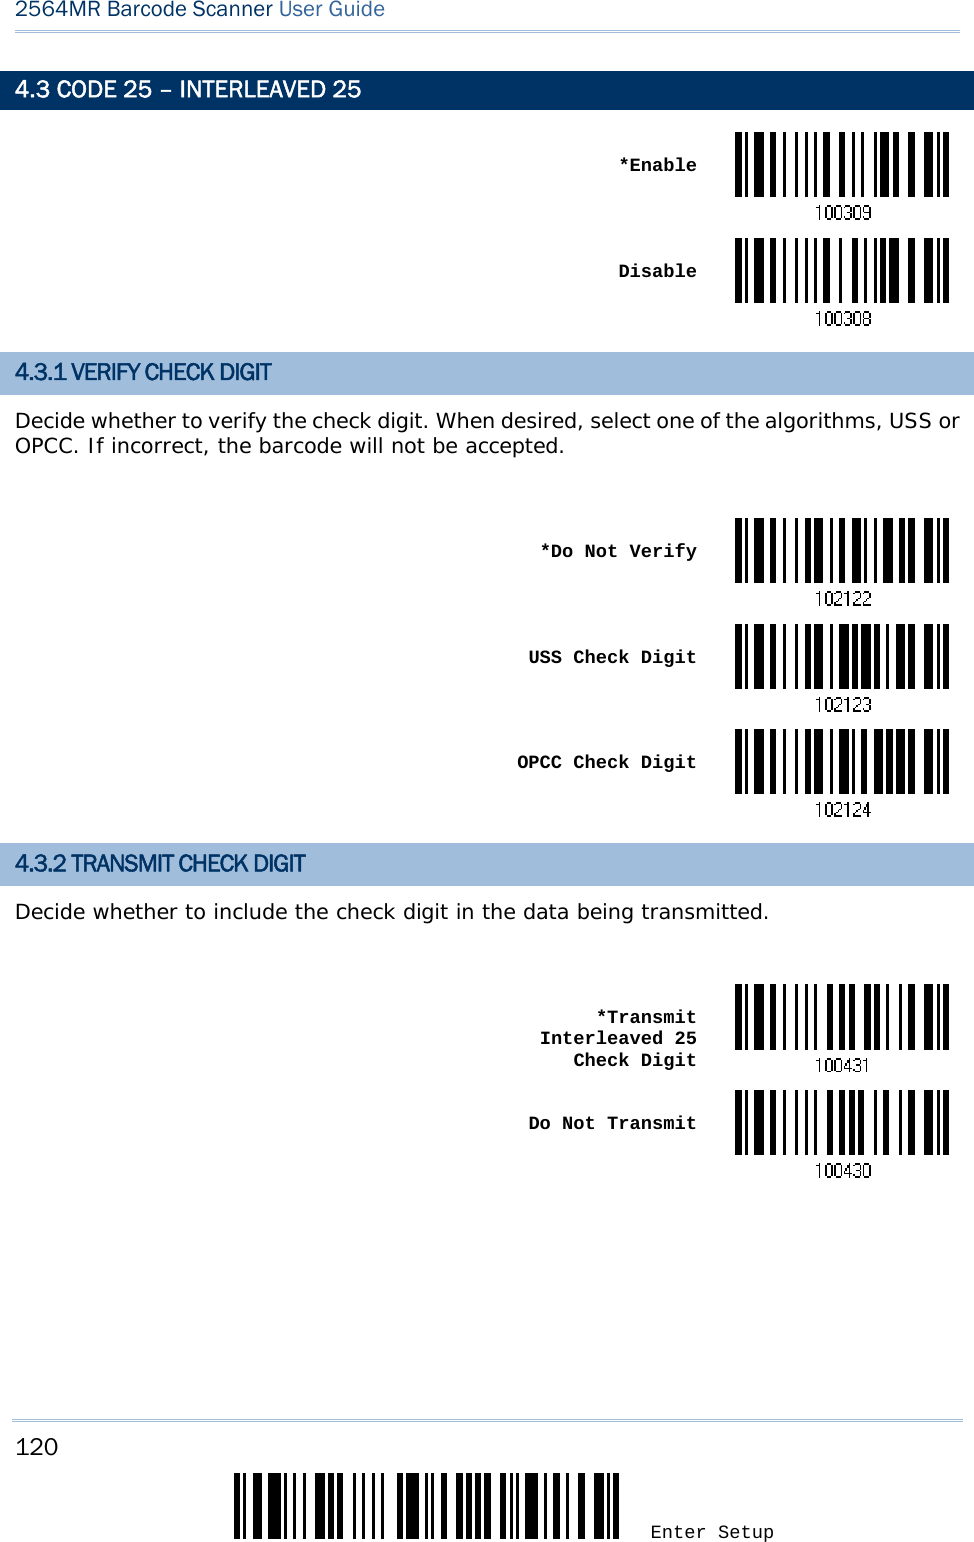 120 Enter Setup 2564MR Barcode Scanner User Guide  4.3 CODE 25 – INTERLEAVED 25  *Enable Disable4.3.1 VERIFY CHECK DIGIT Decide whether to verify the check digit. When desired, select one of the algorithms, USS or OPCC. If incorrect, the barcode will not be accepted.   *Do Not Verify USS Check Digit OPCC Check Digit4.3.2 TRANSMIT CHECK DIGIT Decide whether to include the check digit in the data being transmitted.   *Transmit Interleaved 25  Check Digit Do Not Transmit     